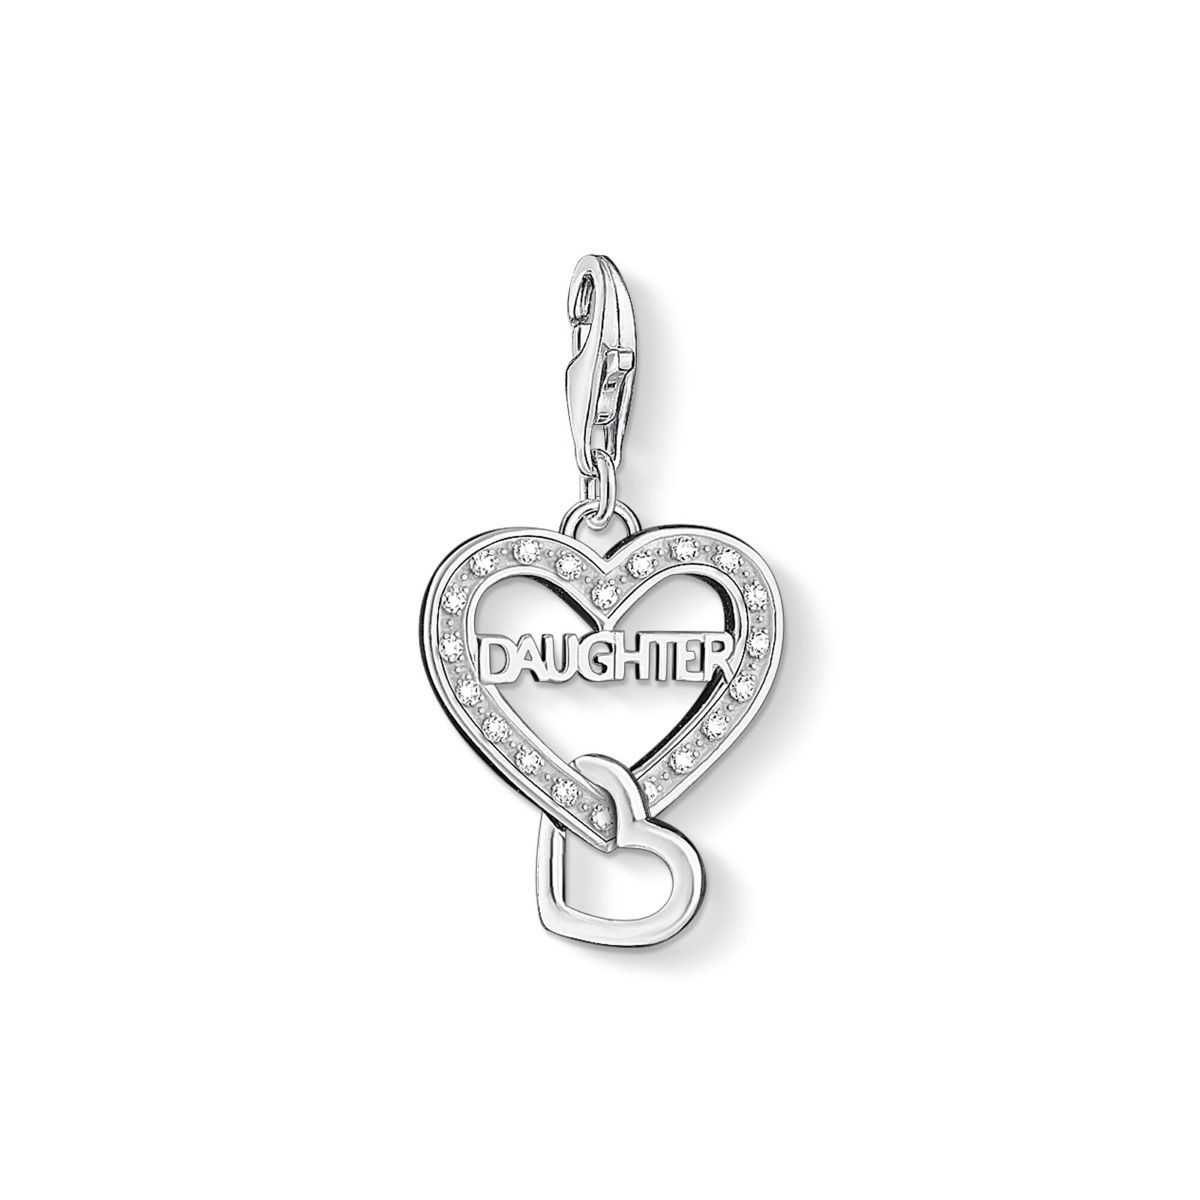 Buy Thomas Sabo Charm Pendant - Sparkling Double Heart Daughter Online